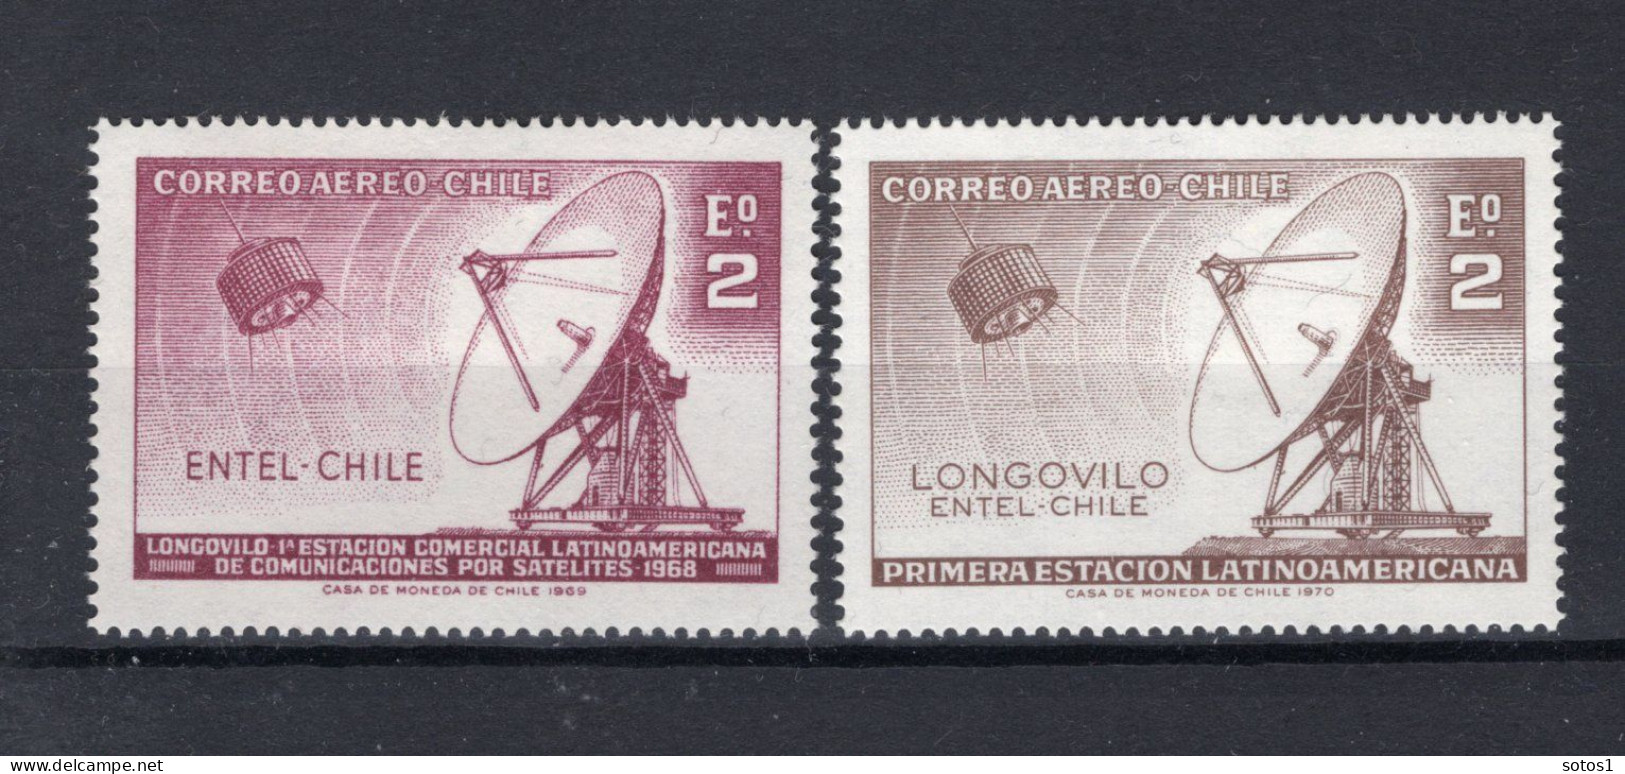 CHILI Yt. PA255/255A MH Luchtpost 1969-1971 - Chile